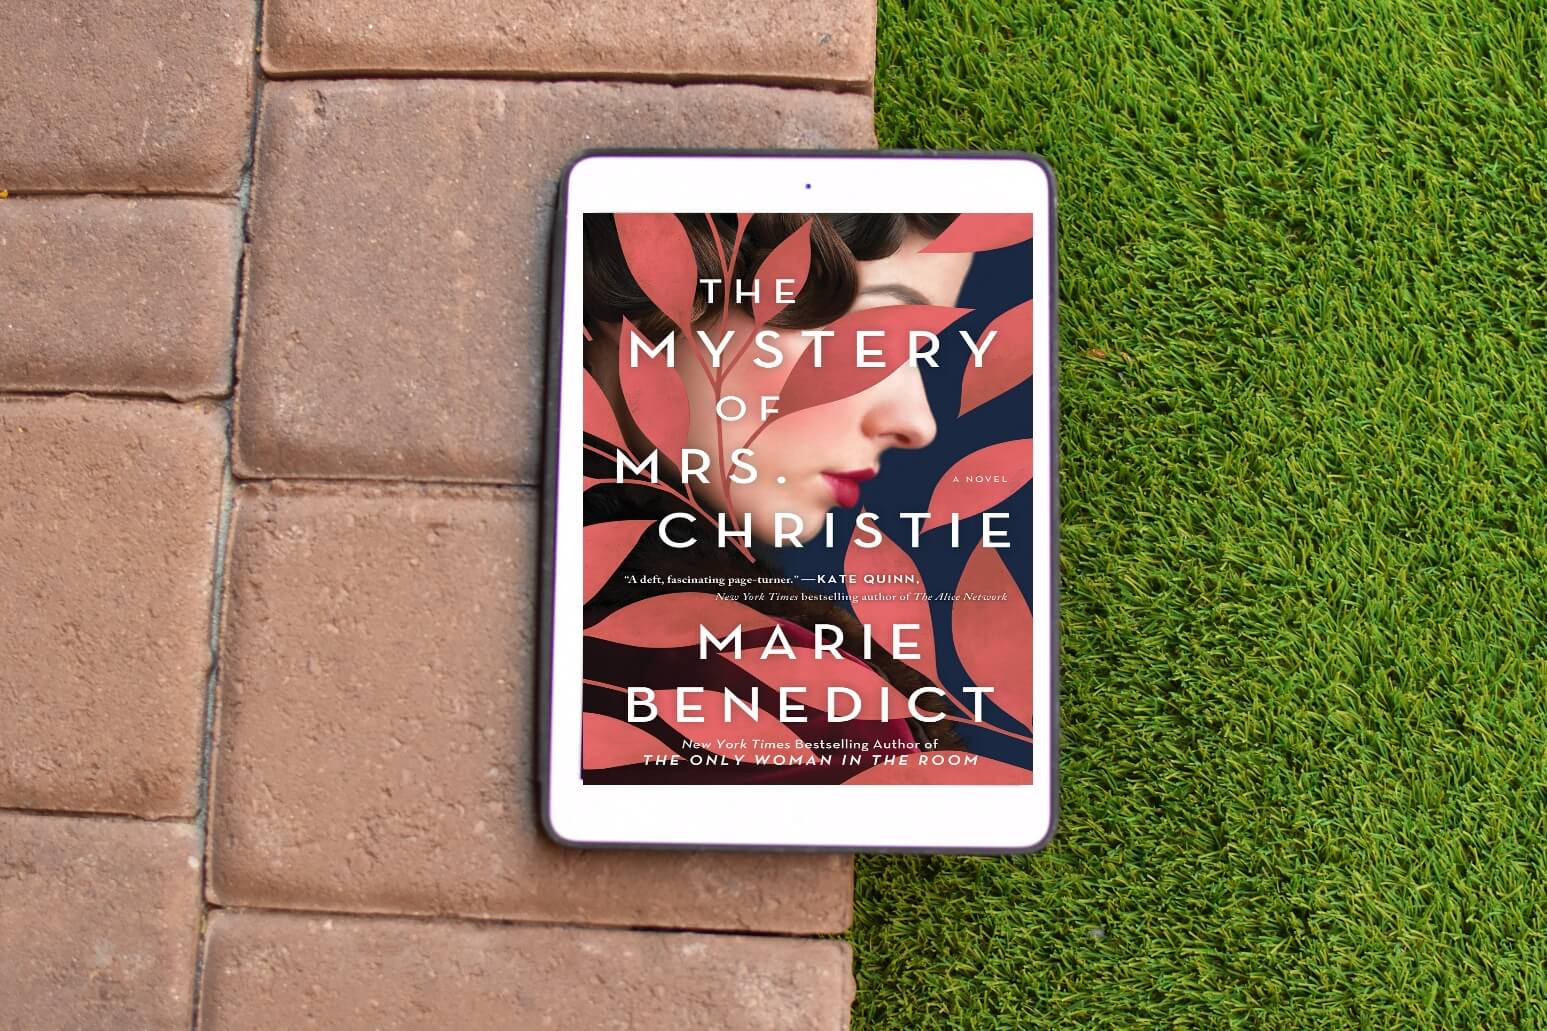 Review: The Mystery of Mrs. Christie by Marie Benedict